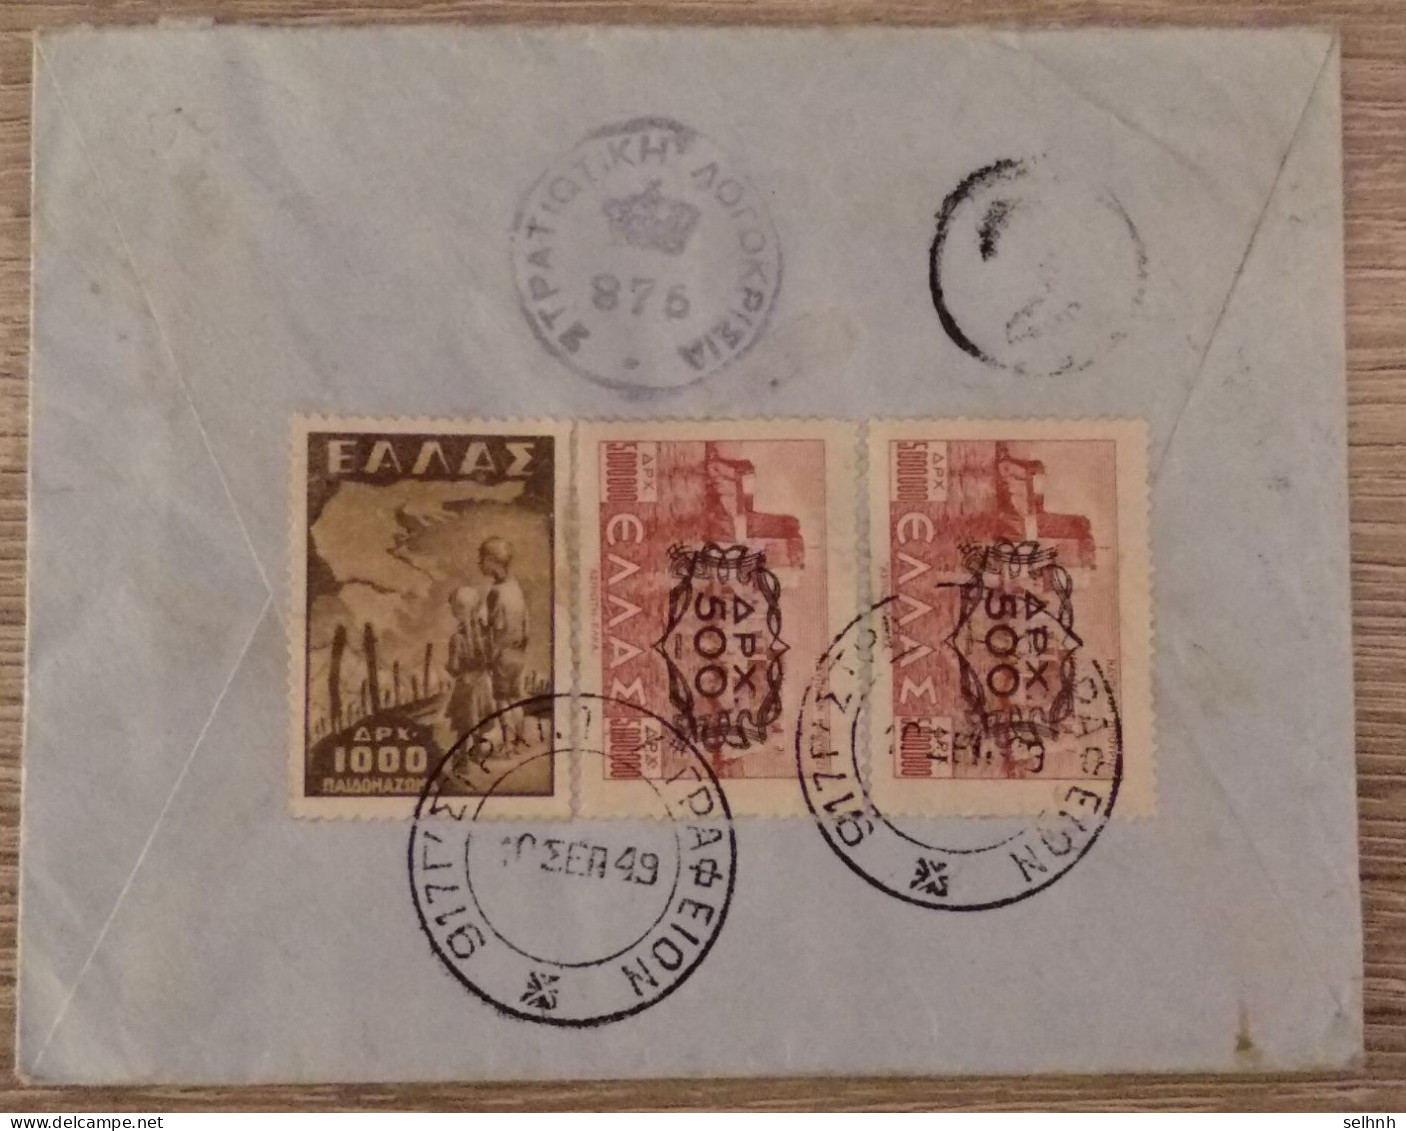 GREECE GRECE COVER TO FRANCE WITH ARMY GENSOR 876. THE STAMPS WERE CANCELED WITH "917 STRAT GRAFEION" - Briefe U. Dokumente